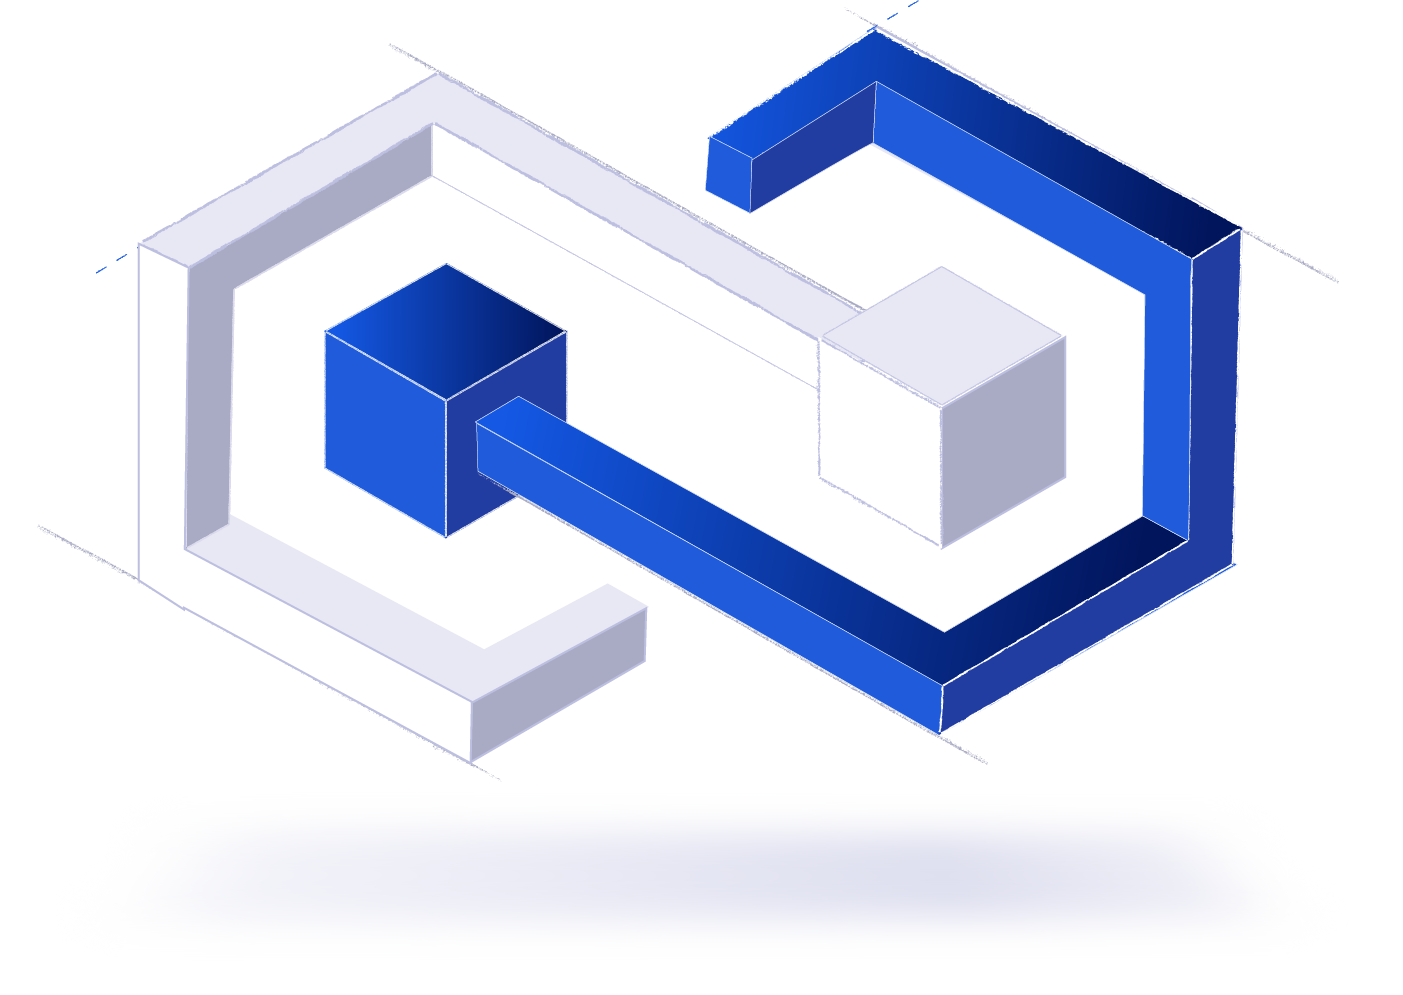 Blue and white technical illustration representing symbiosis